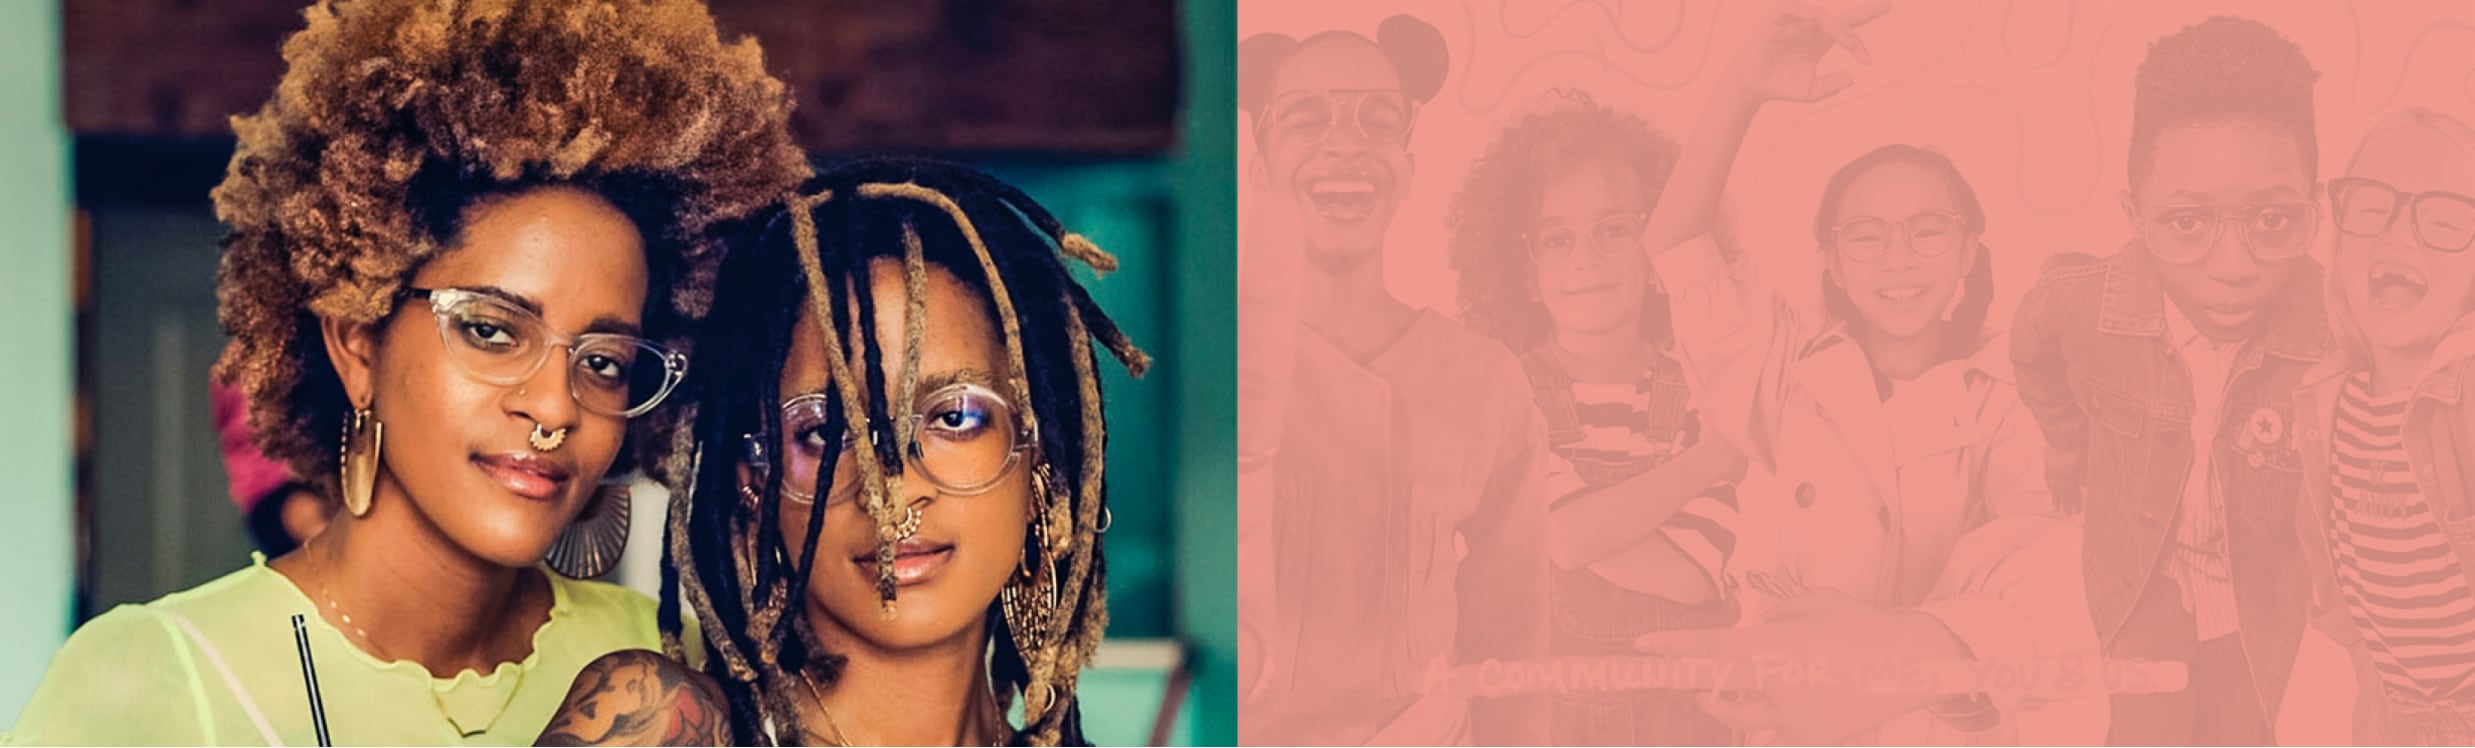 Meet Coco and Breezy. Planet cb is a collaboration with premium eyewear designers Coco and Breezy. These creative twin sisters are also entrepreneurs, DJs, influencers, visual artists, and co-hosts of Wonderama, a weekly variety TV show for kids. Link to soundcloud playlist.